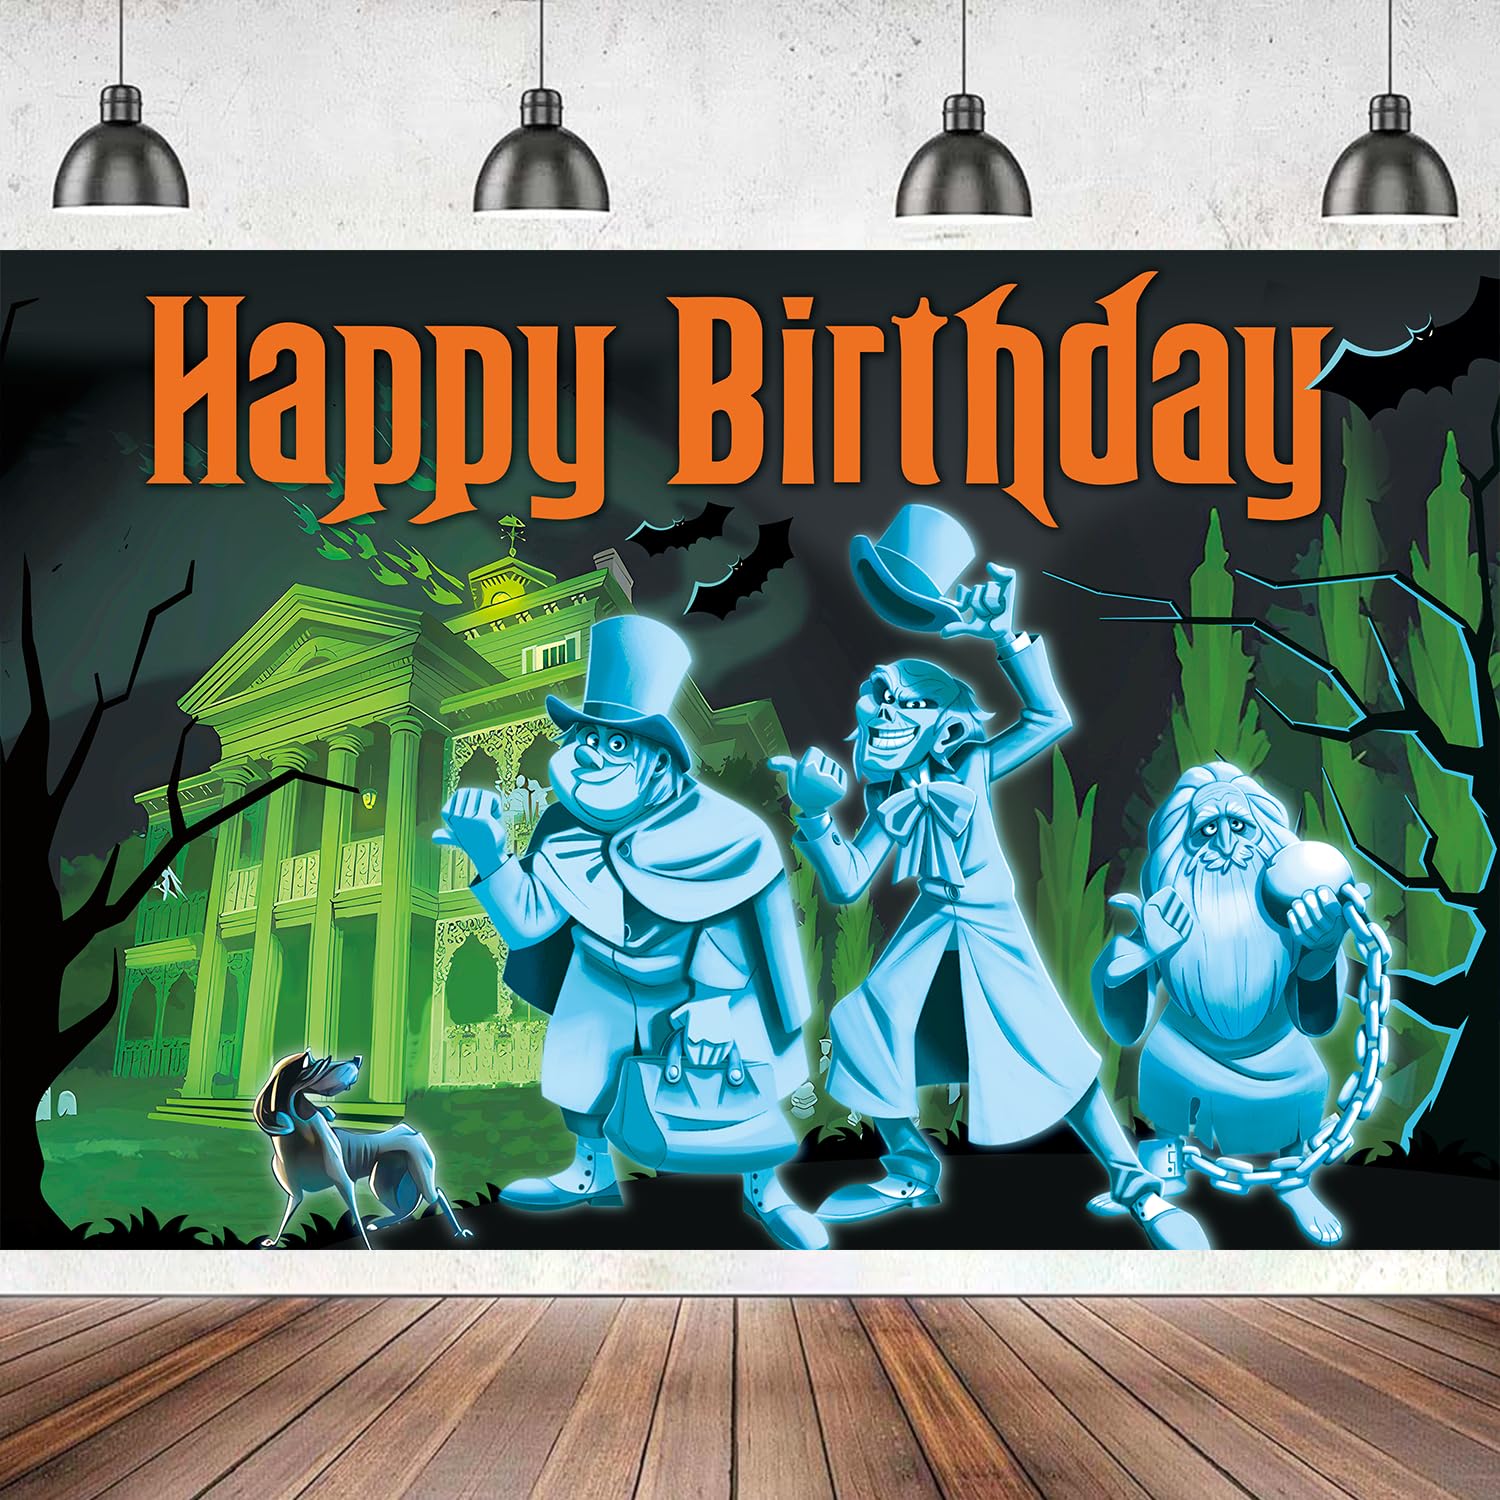 5x3FT Haunted House Birthday Decorations Banner, Halloween Haunted House Decor Happy Birthday Banner, Cartoon Halloween Haunted House Birthday Party Supplies Photography Decorations